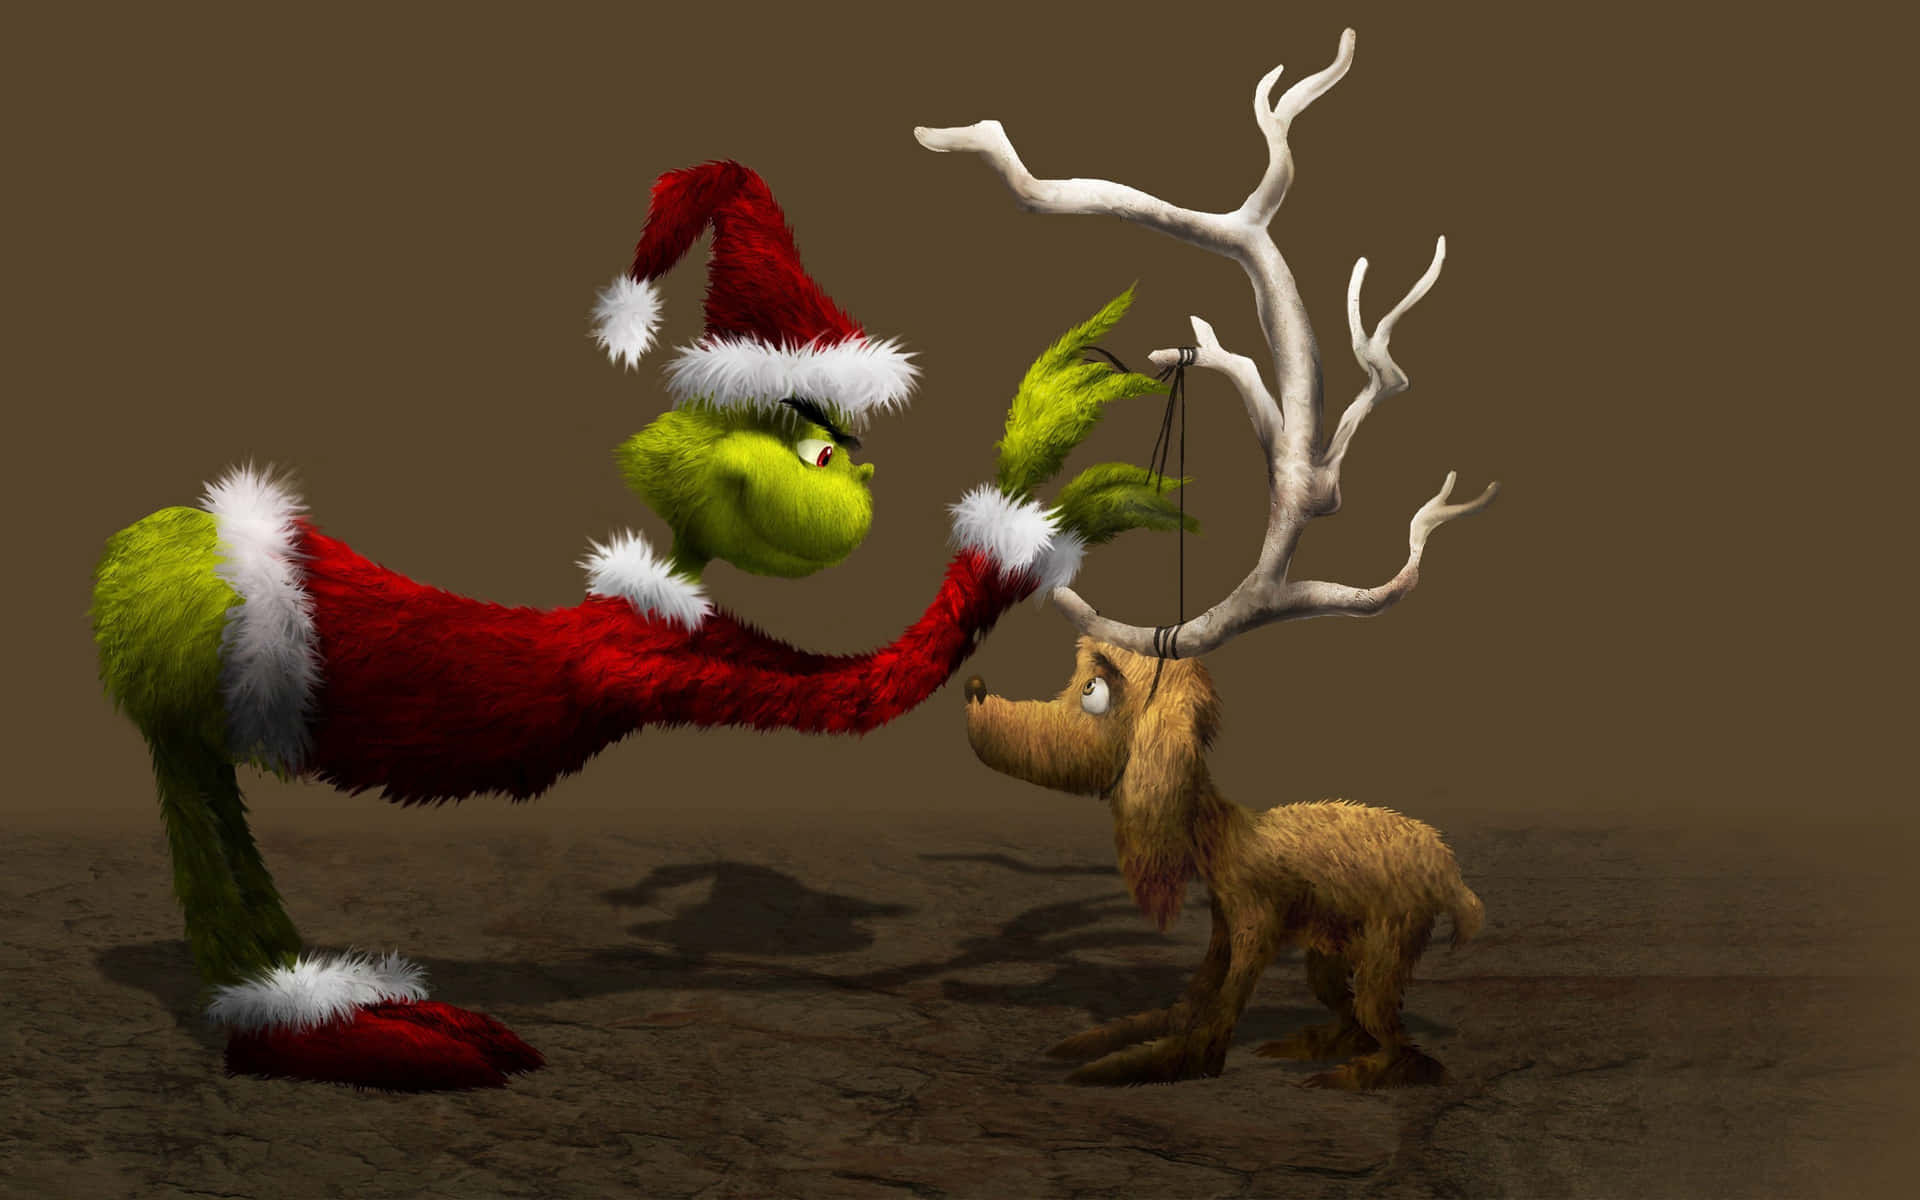 The Grinch Is Ready To Spread Christmas Cheer This Year! Background